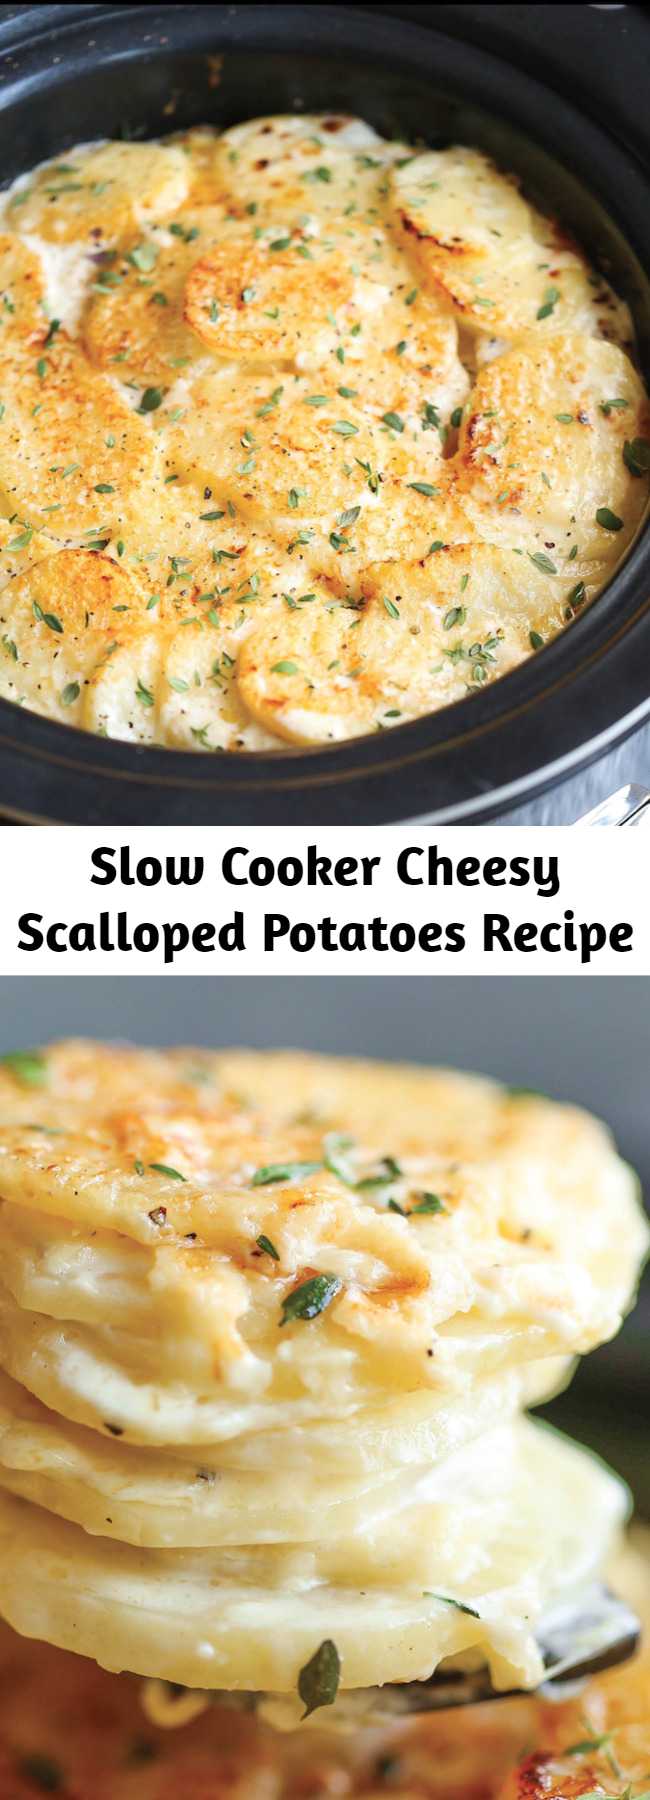 Slow Cooker Cheesy Scalloped Potatoes Recipe - This crockpot version of scalloped potatoes is so EASY, creamy, tender and cheesy! And it frees up your oven space!